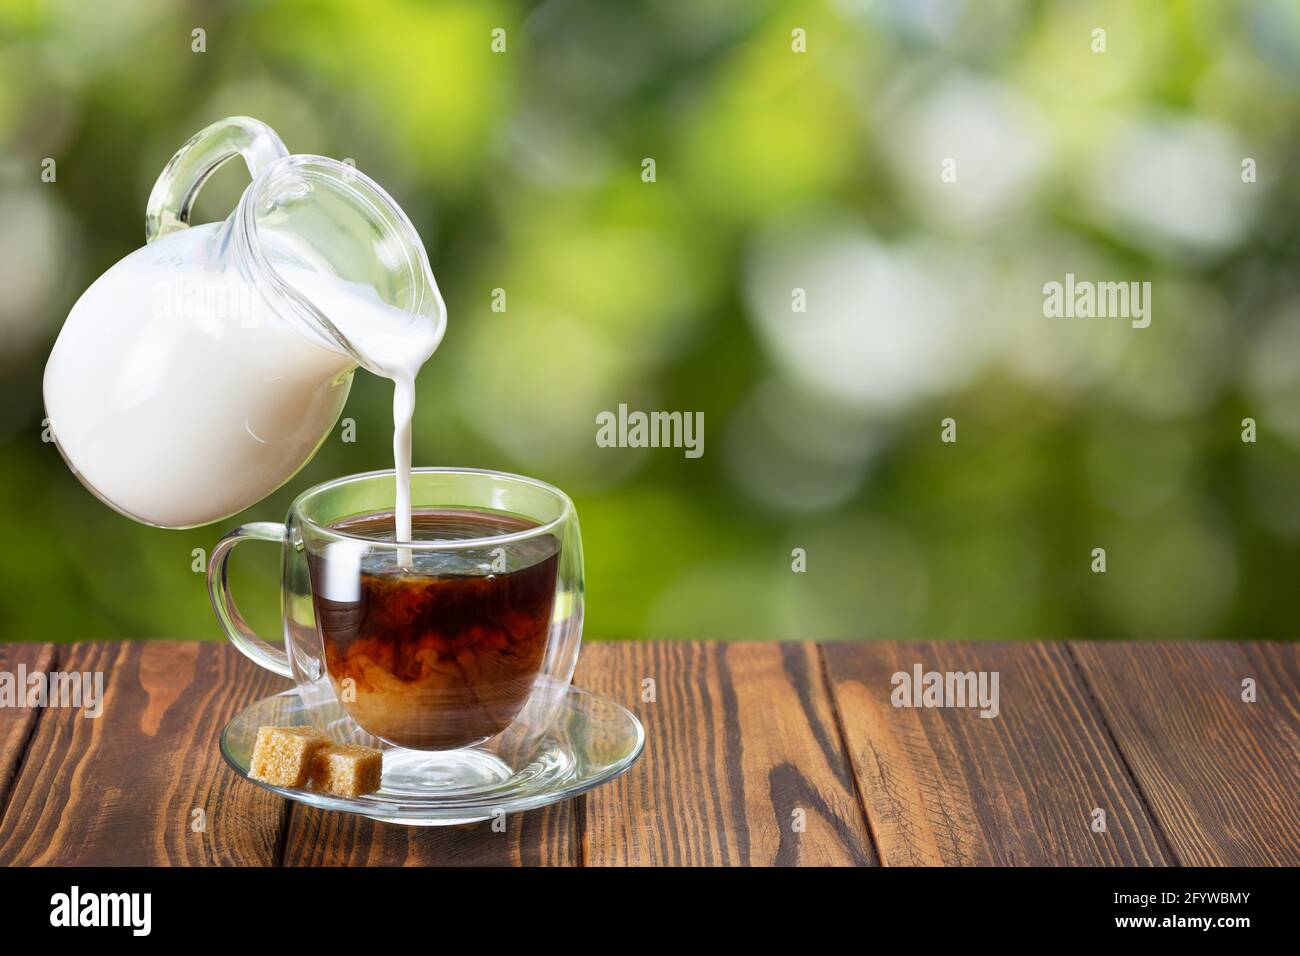 cream pouring from flying jug into cup of coffee Stock Photo